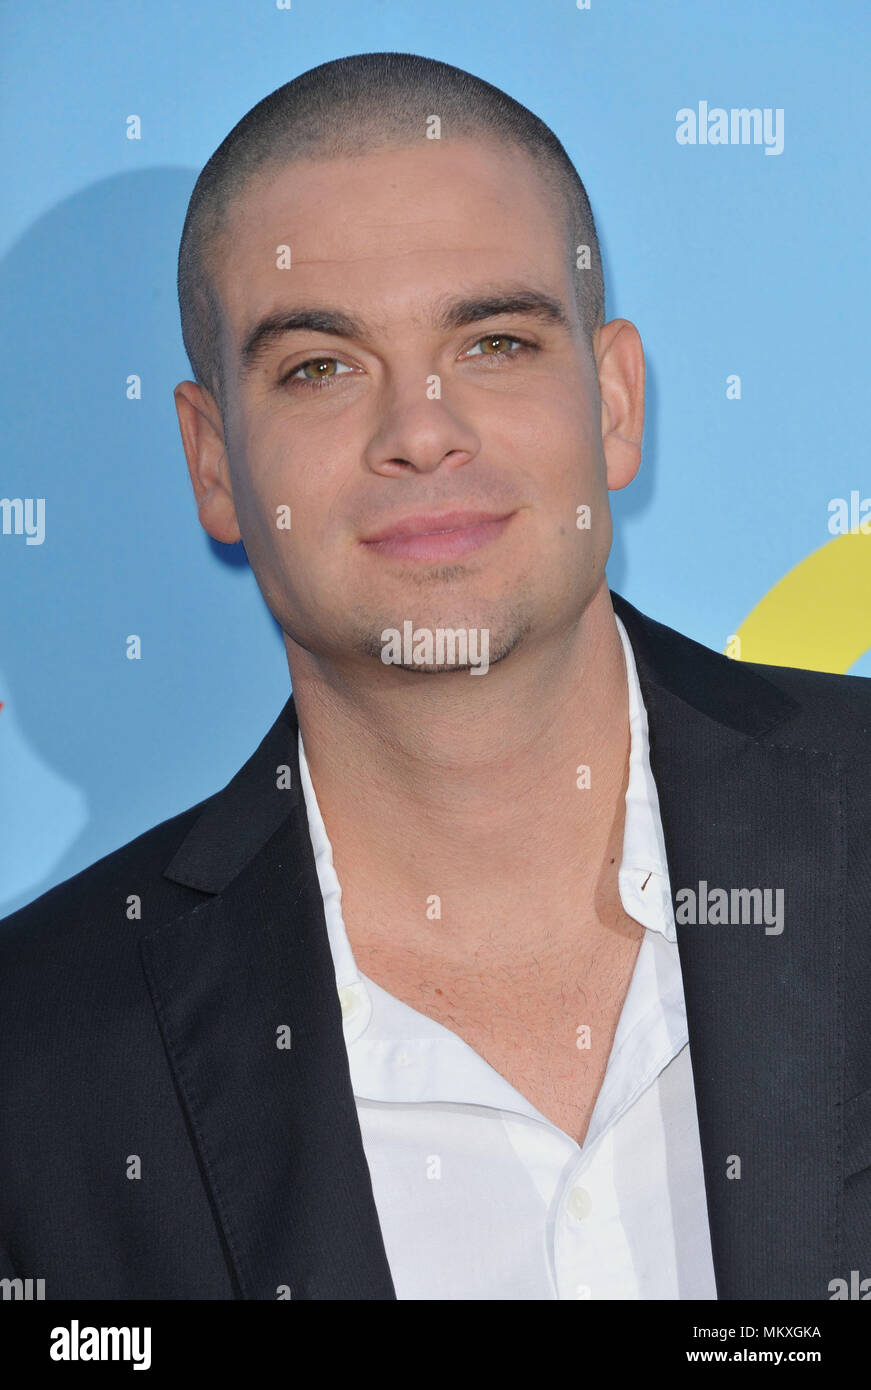 Mark Salling  at the GLEE Premiere on the Paramount Lot in Los Angeles.Mark Salling  Red Carpet Event, Vertical, USA, Film Industry, Celebrities,  Photography, Bestof, Arts Culture and Entertainment, Topix Celebrities fashion /  Vertical, Best of, Event in Hollywood Life - California,  Red Carpet and backstage, USA, Film Industry, Celebrities,  movie celebrities, TV celebrities, Music celebrities, Photography, Bestof, Arts Culture and Entertainment,  Topix, headshot, vertical, one person,, from the year , 2012, inquiry tsuni@Gamma-USA.com Stock Photo